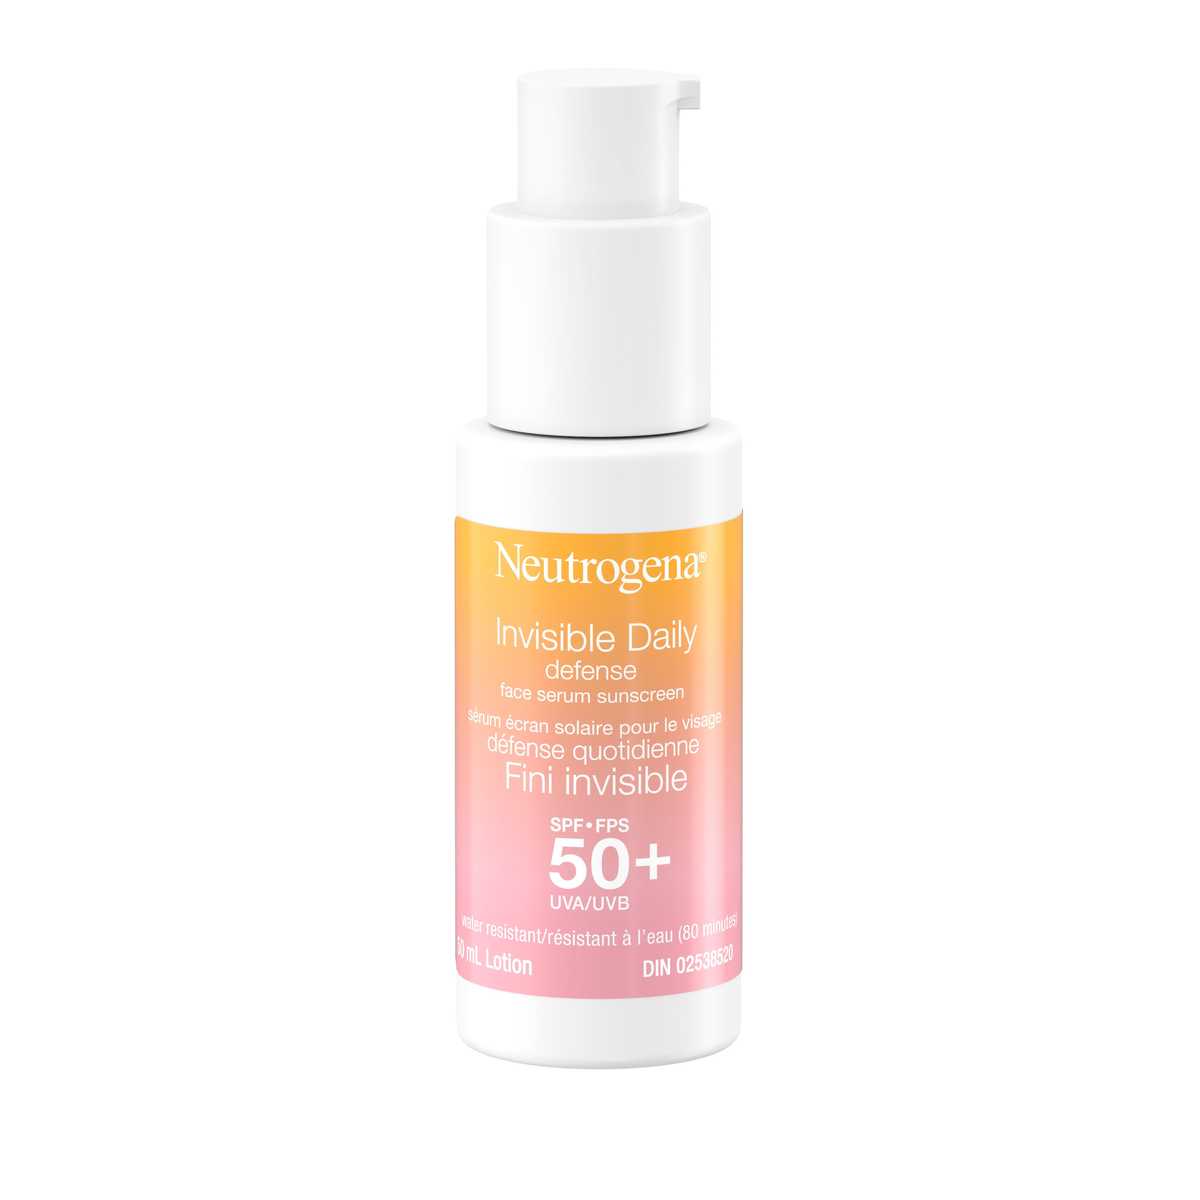 Front shot of Neutrogena® Invisible Daily Defense Face Serum Sunscreen SPF 50+, pump bottle.